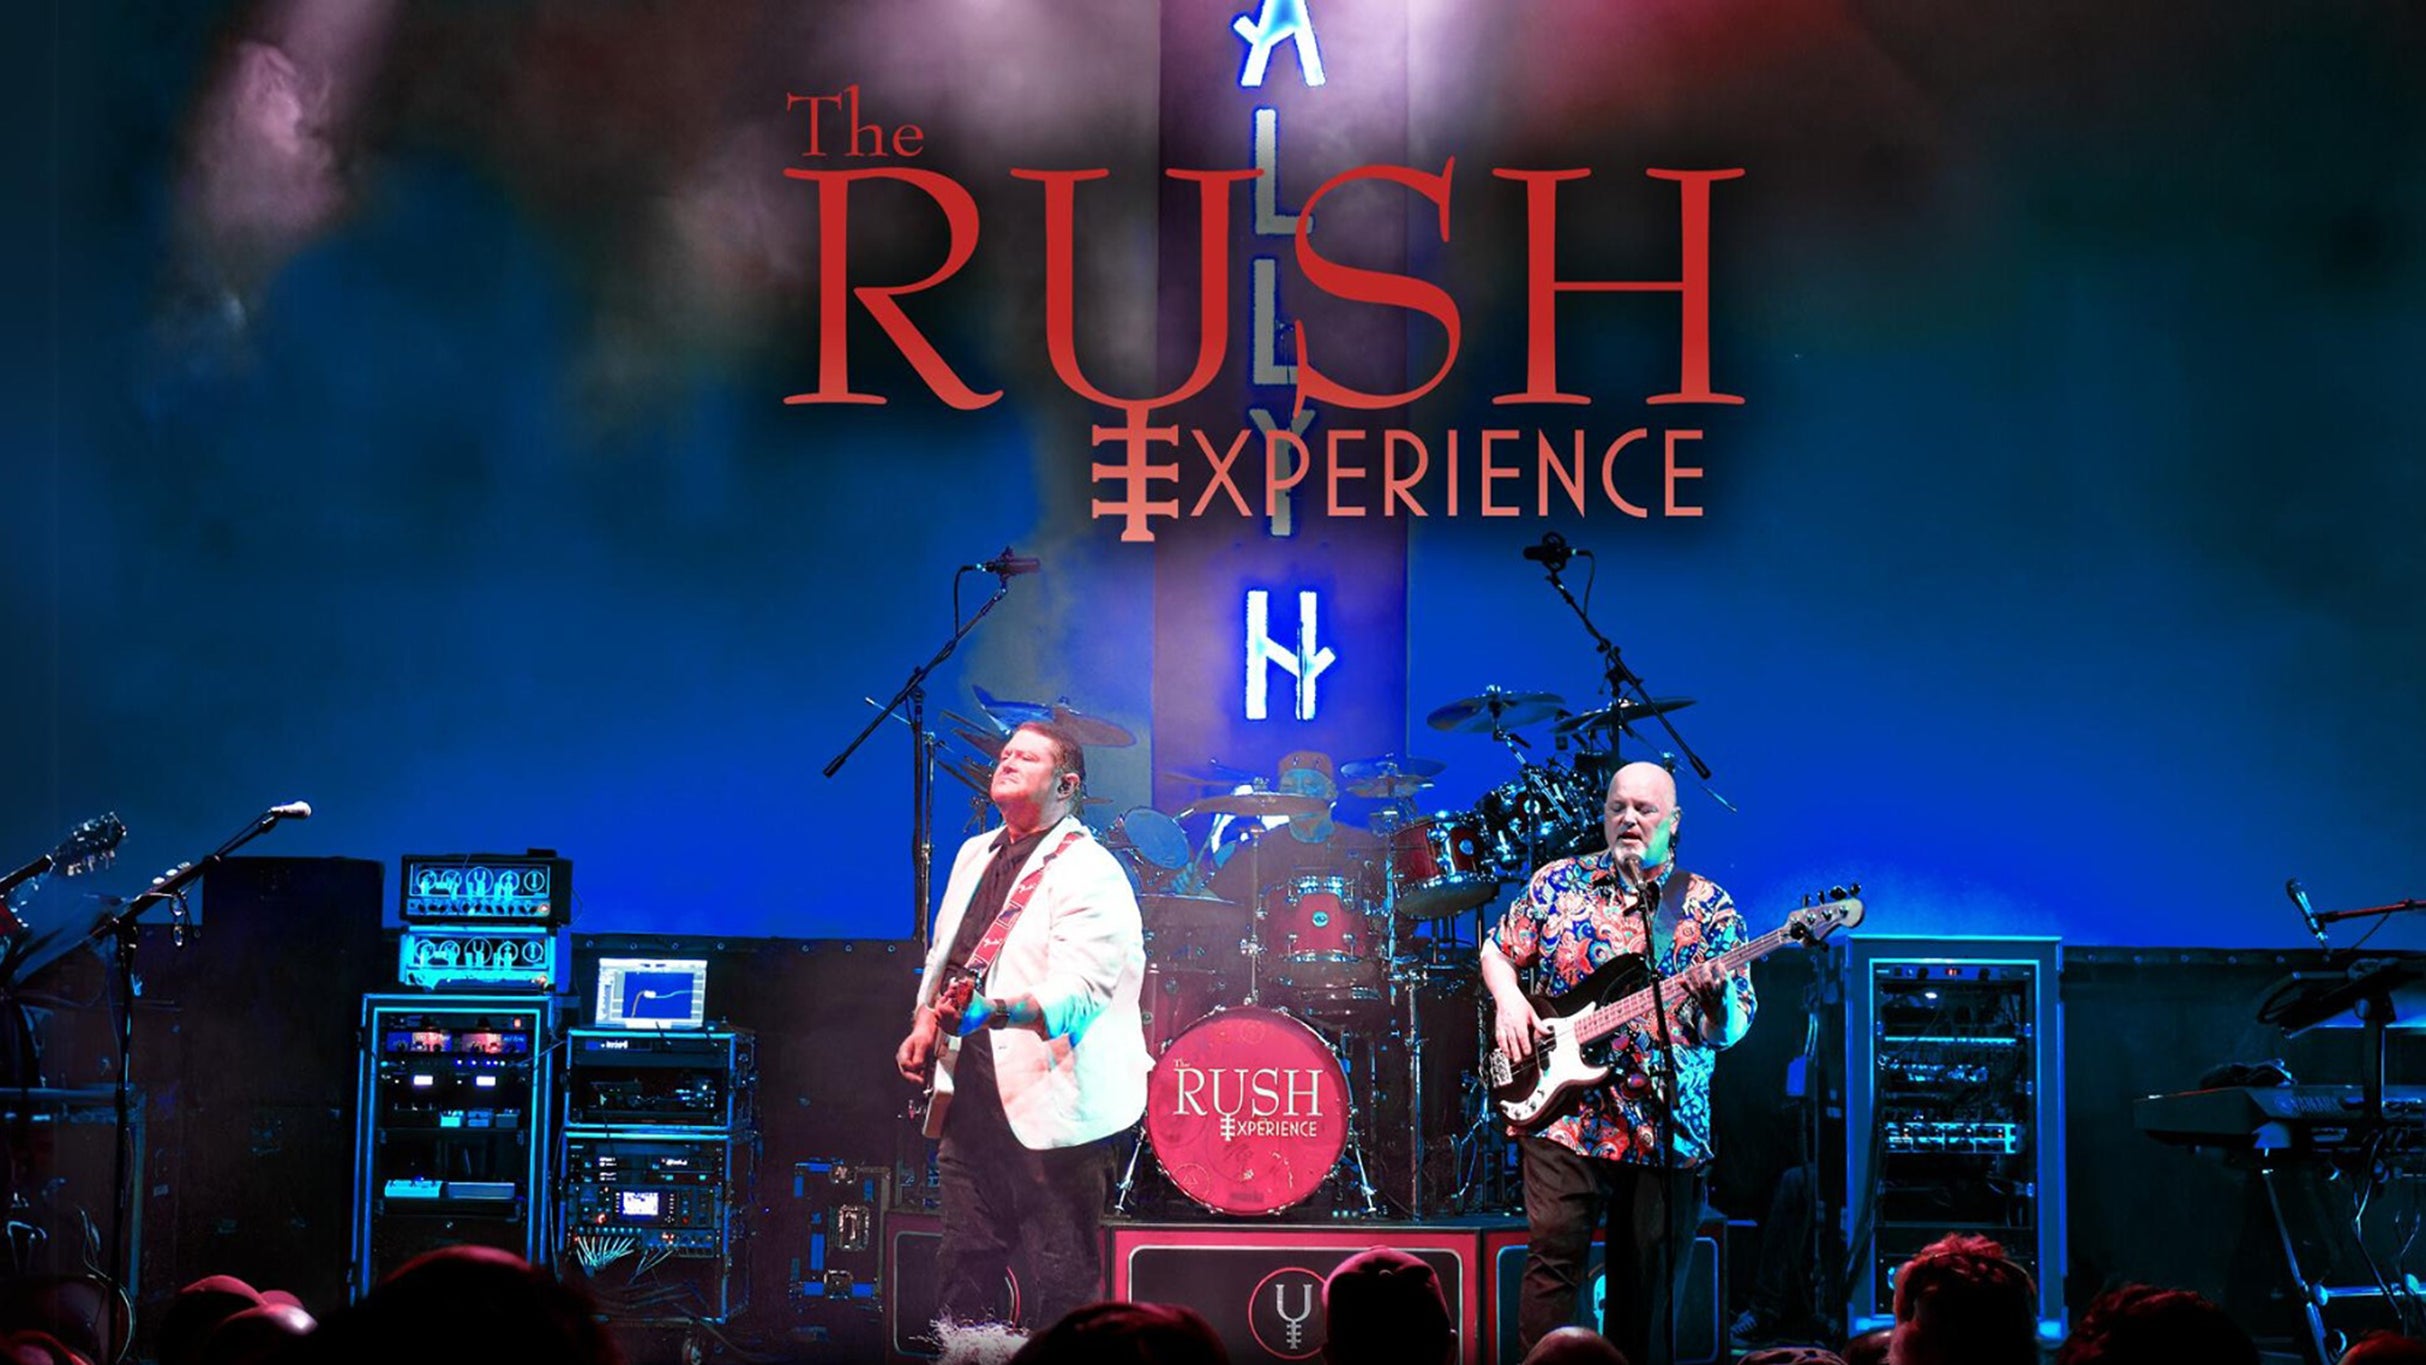 members only presale code for The Rush Experience face value tickets in Atlantic City at Tropicana Showroom at Tropicana Atlantic City